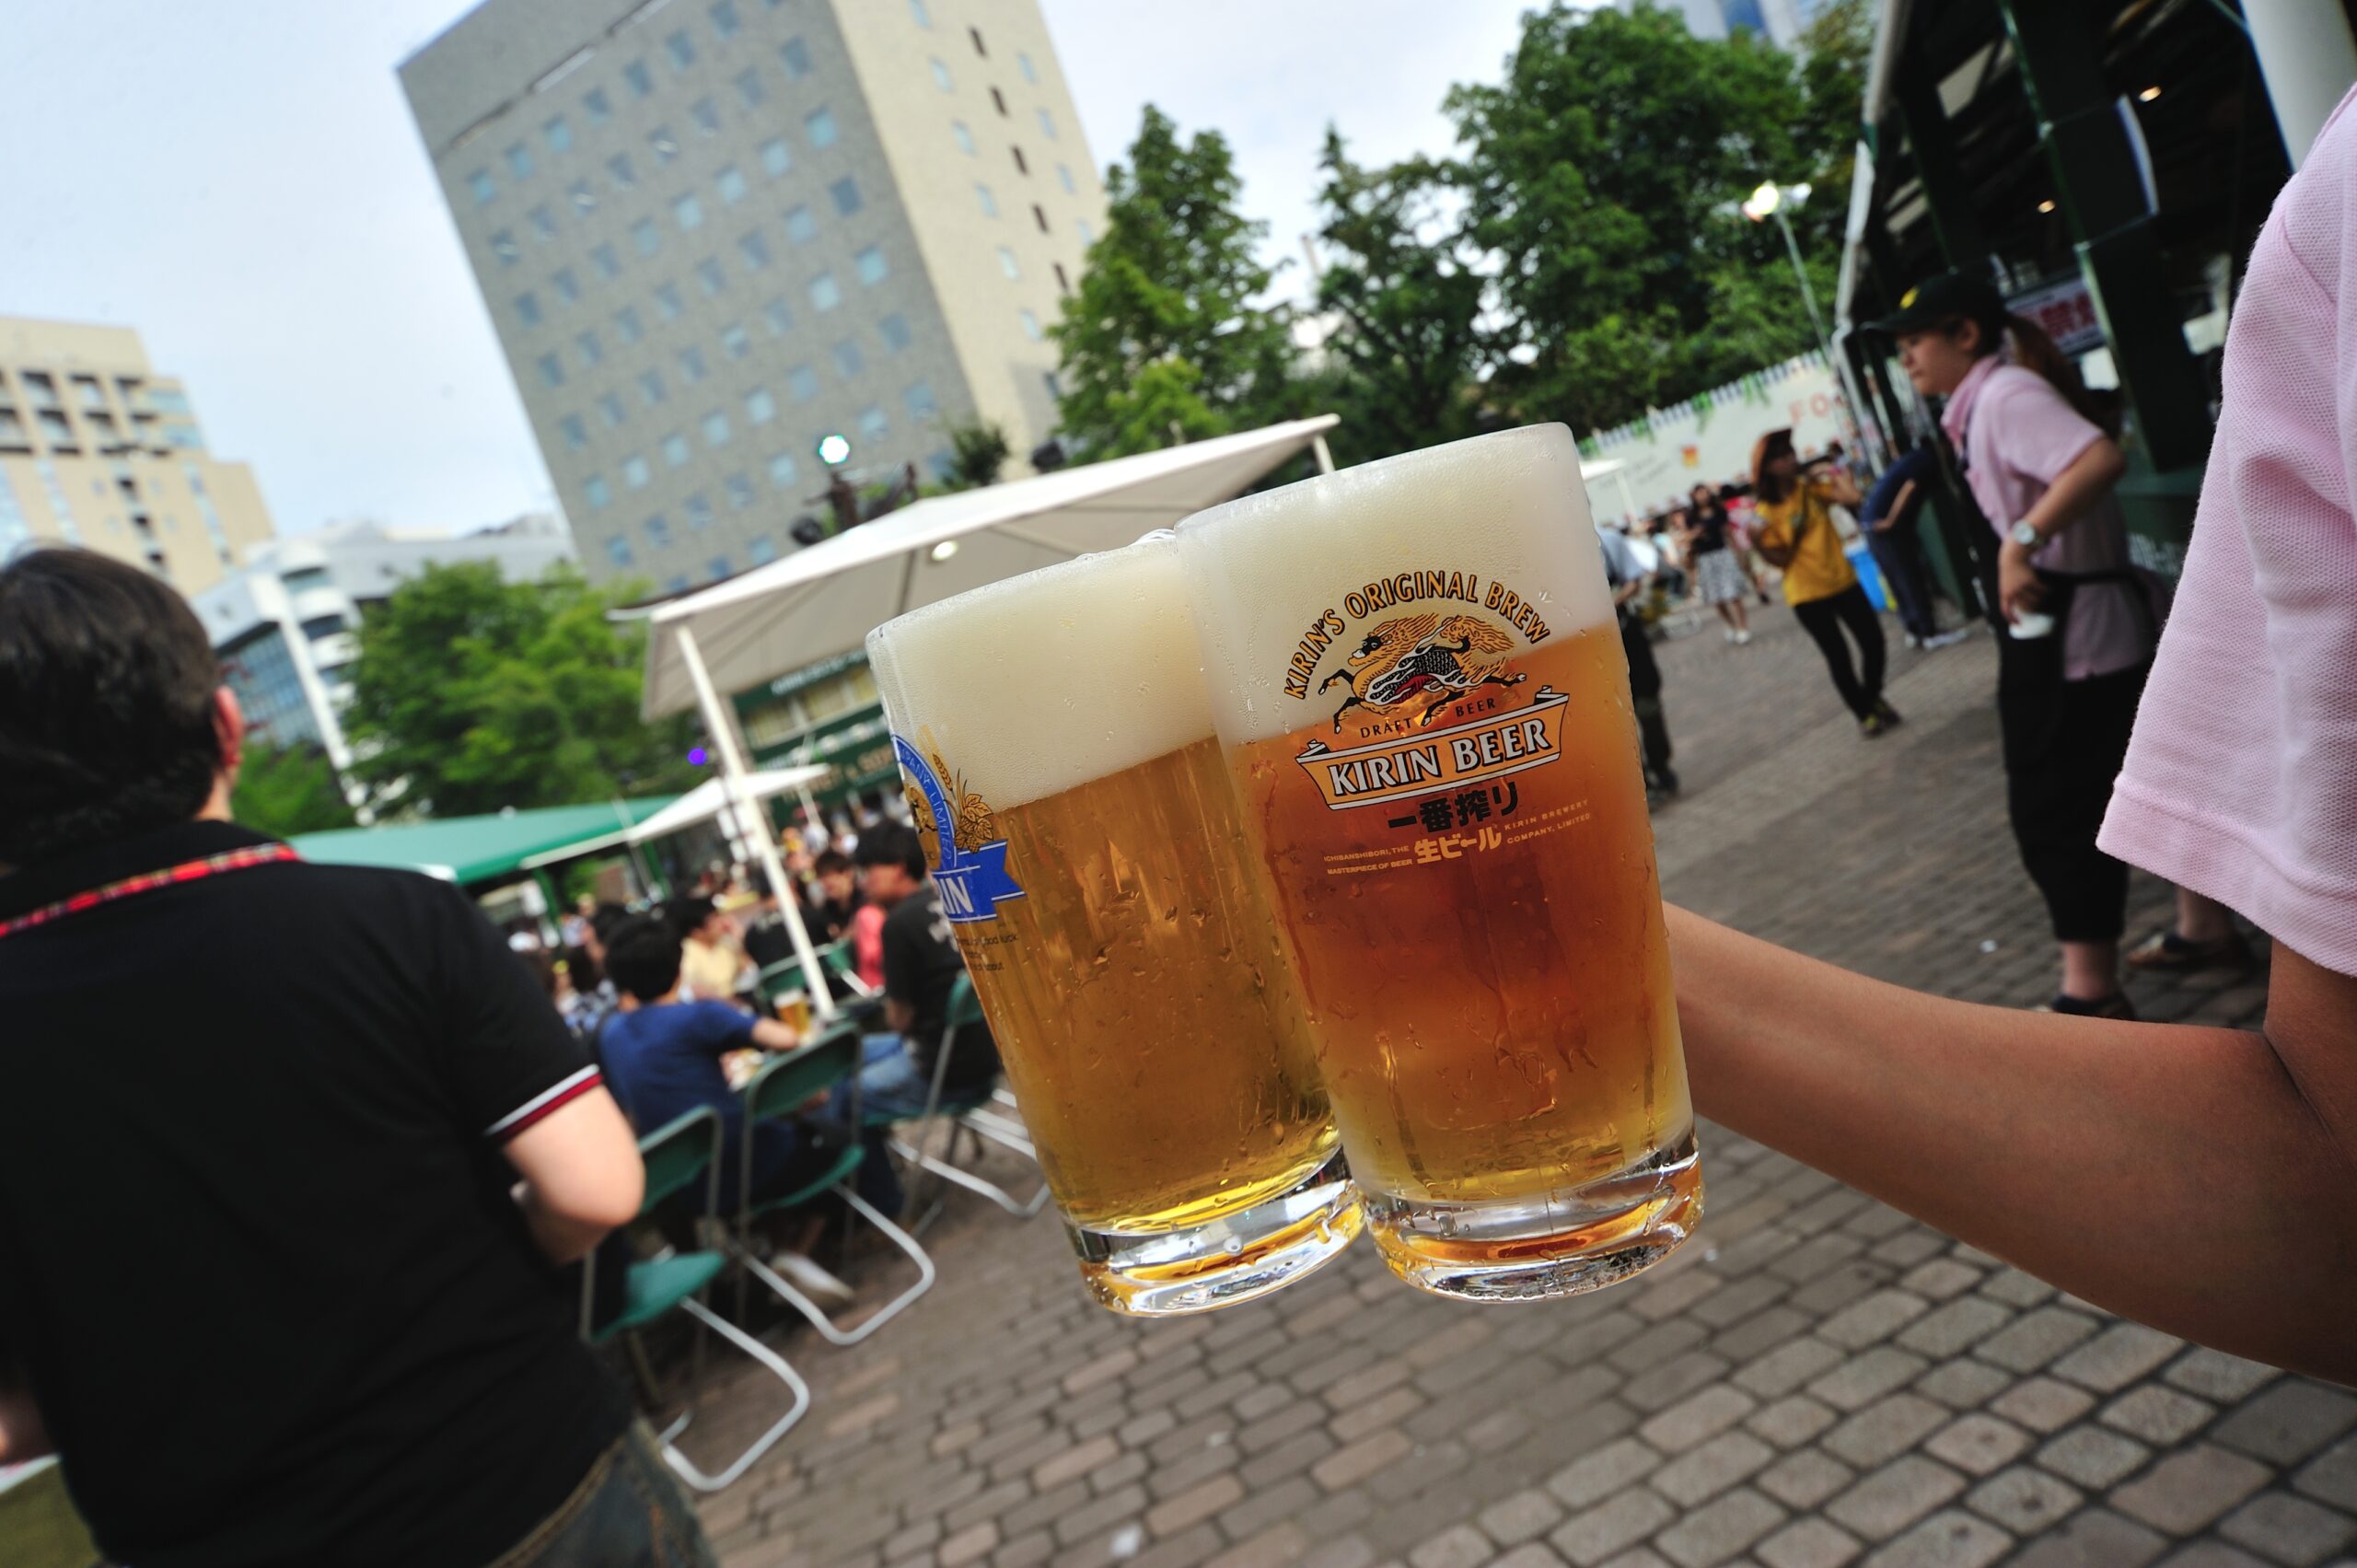 Japan's biggest beer brands each construct their own beer garden. A number of international beers are available too!